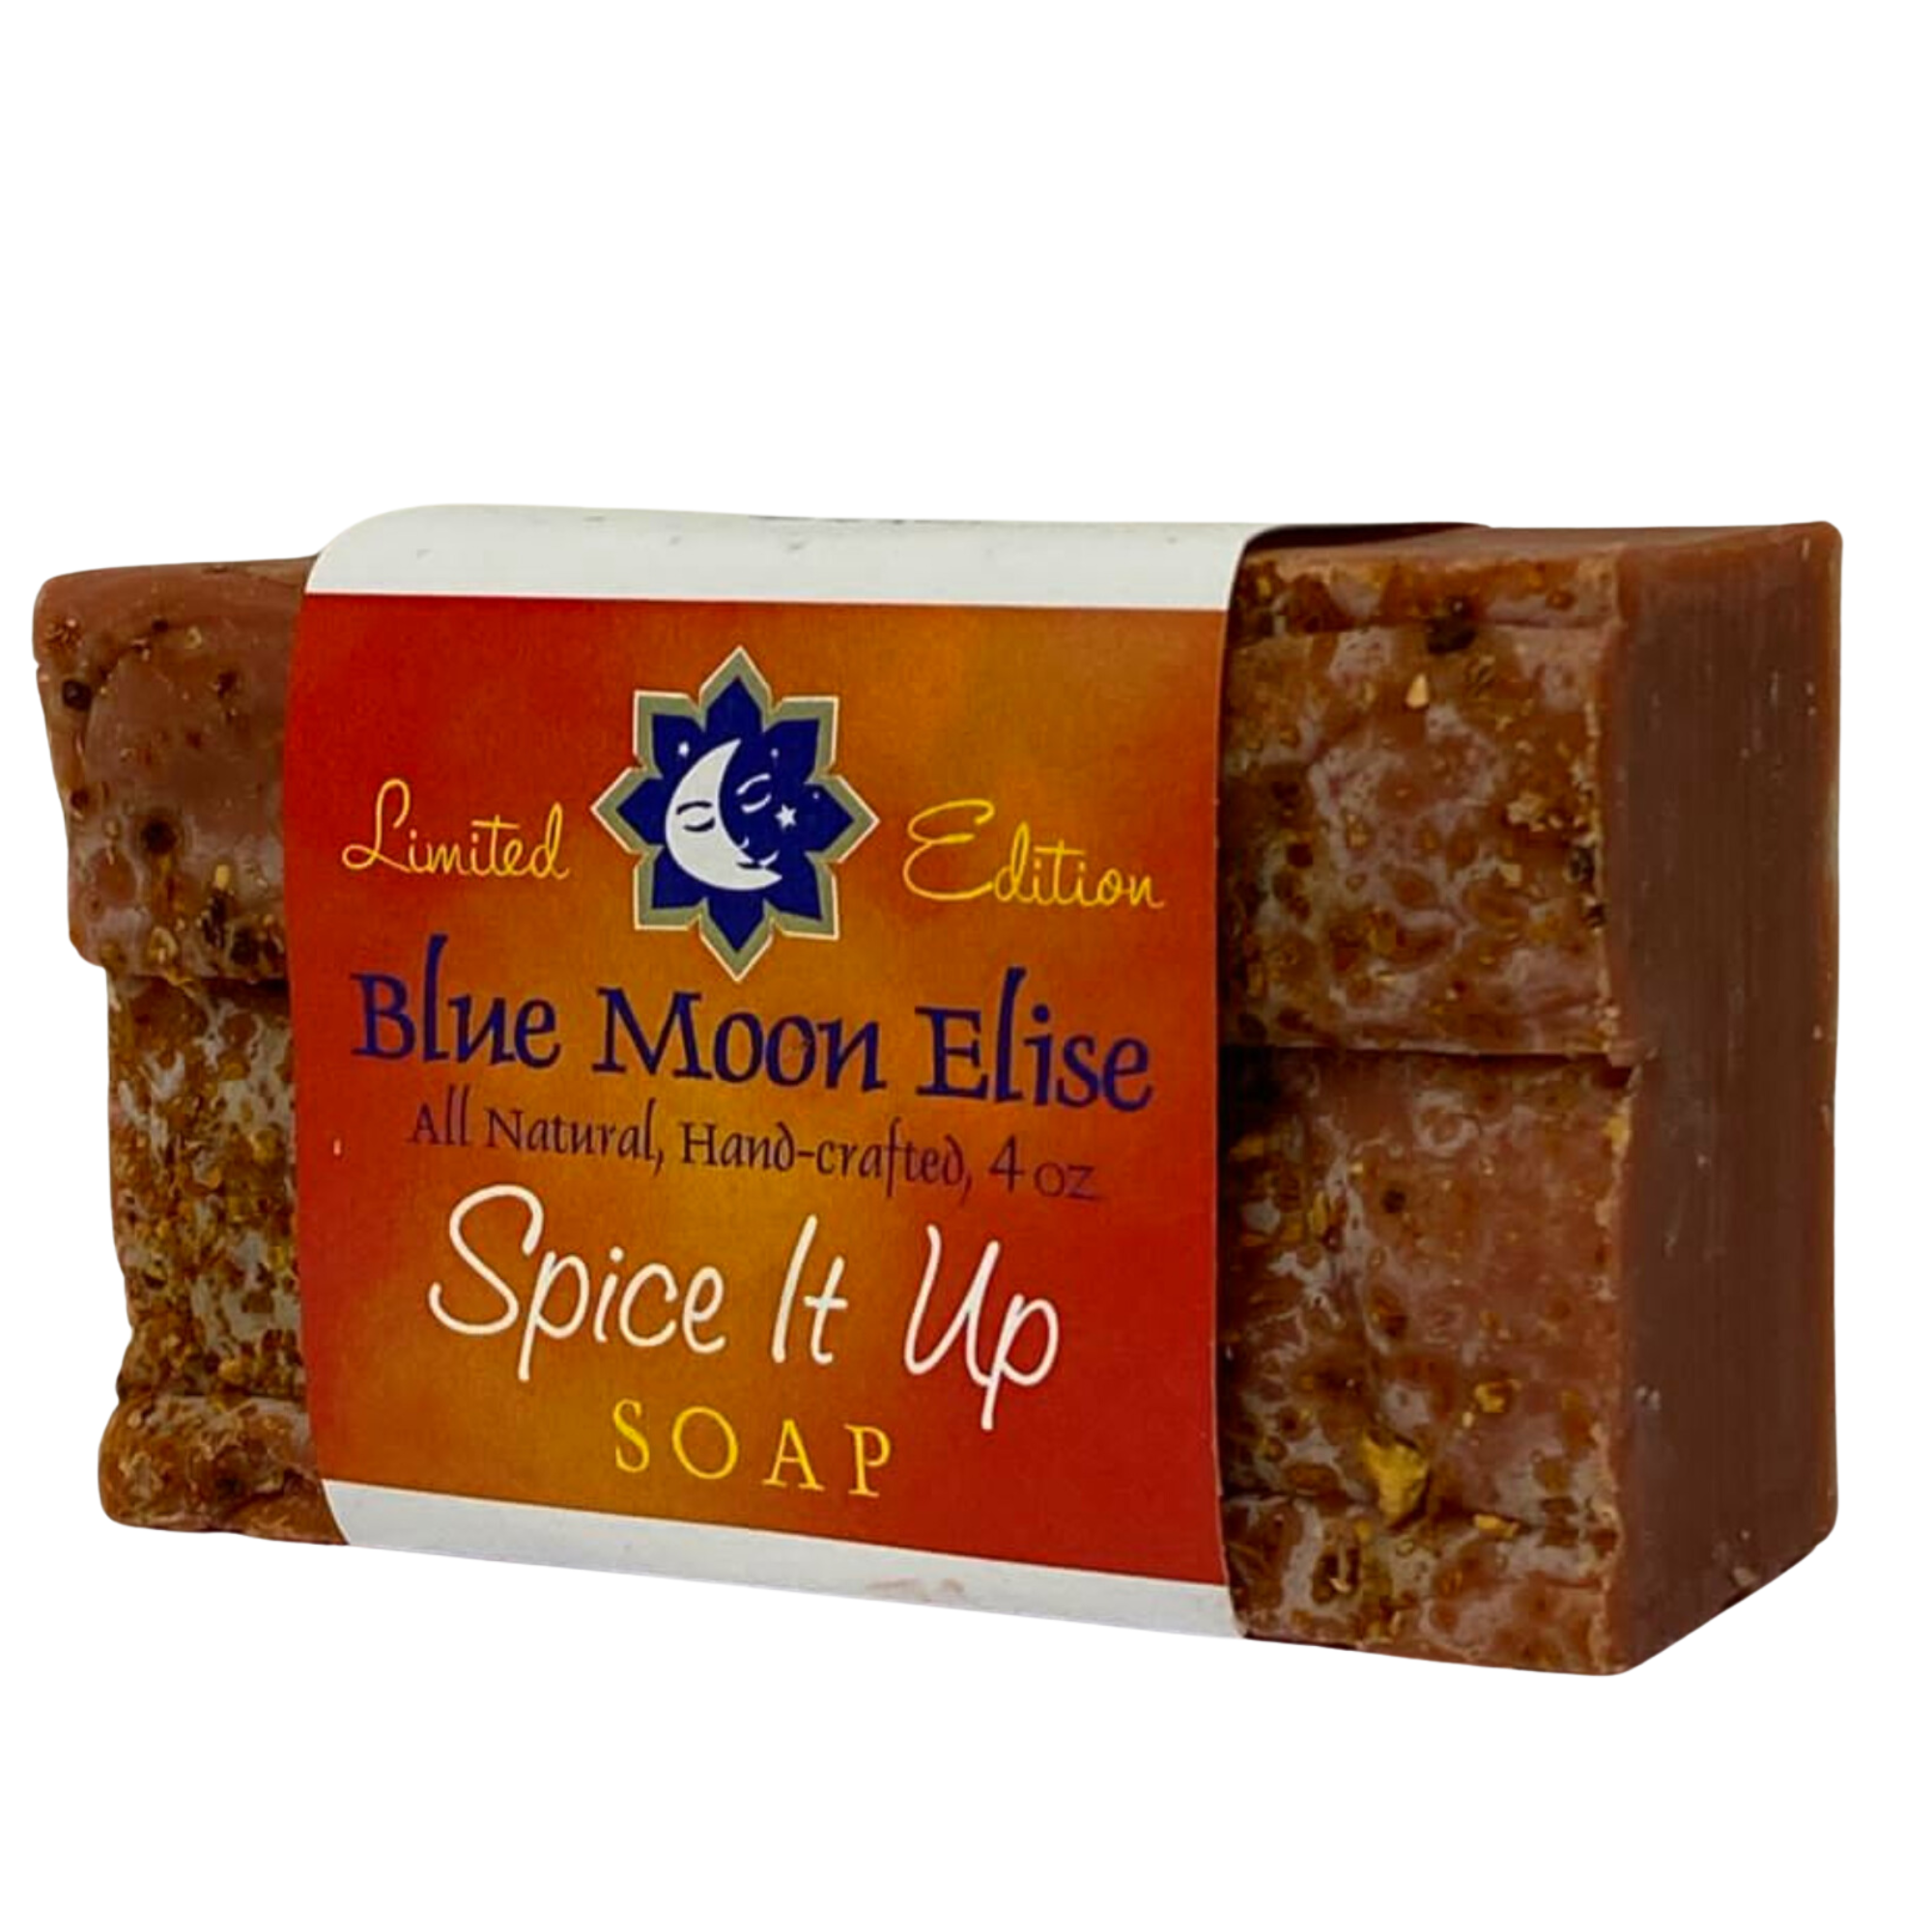 Spice it up Soap (Buy 1, Add 2 More for FREE)